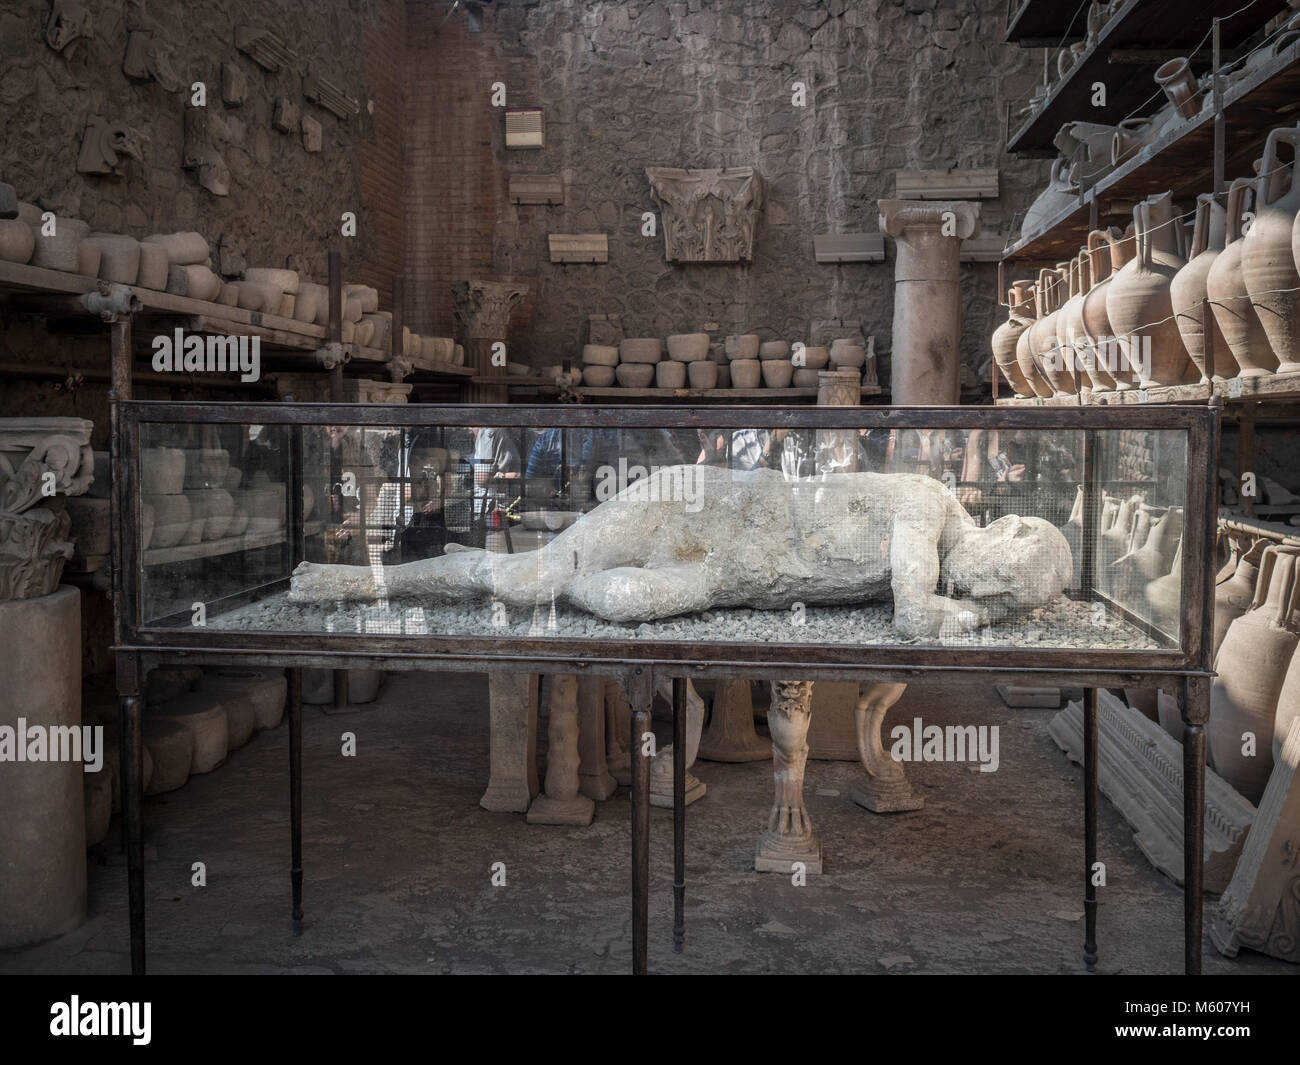 Body cast of a Pompeii victim display in a glass case, along with other excavated artefacts. Pompeii. Italy. Stock Photo